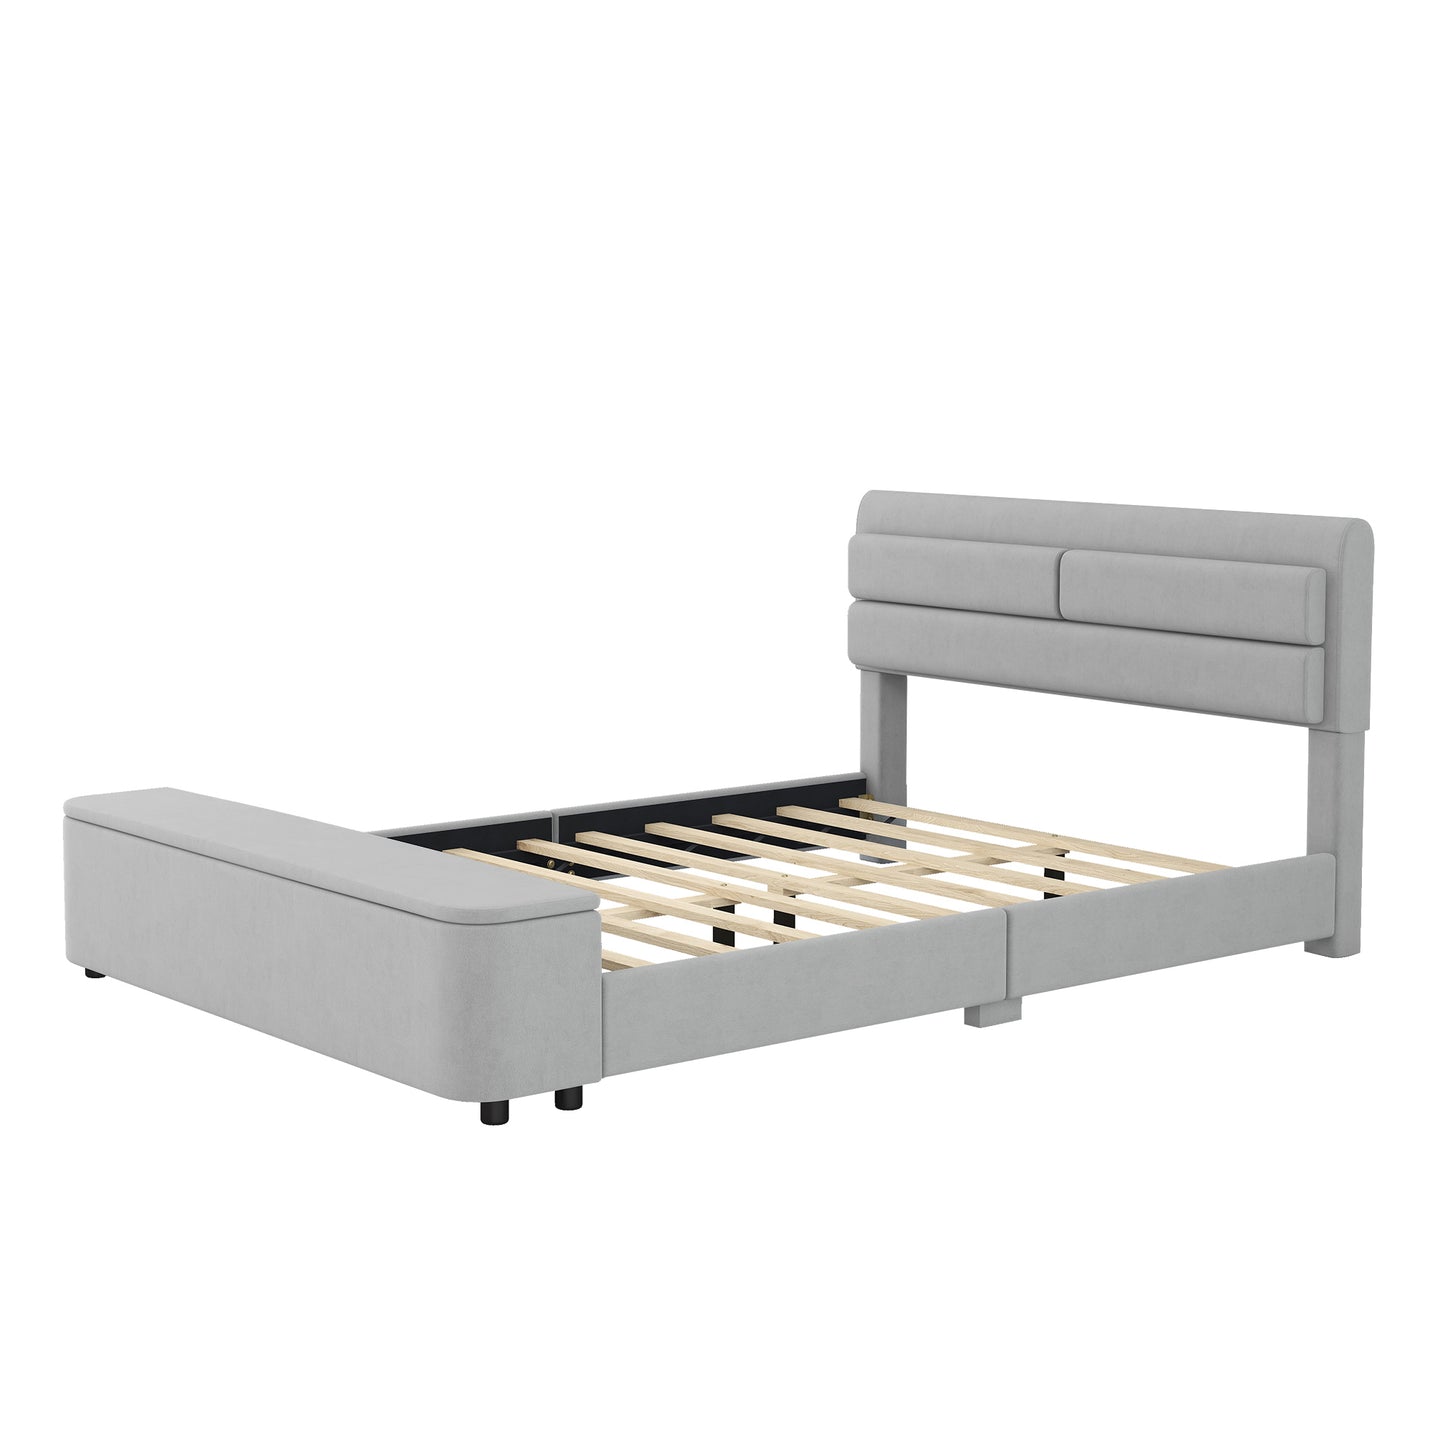 Queen Size Upholstery Platform Bed with Storage Headboard and Footboard,Support Legs,Grey